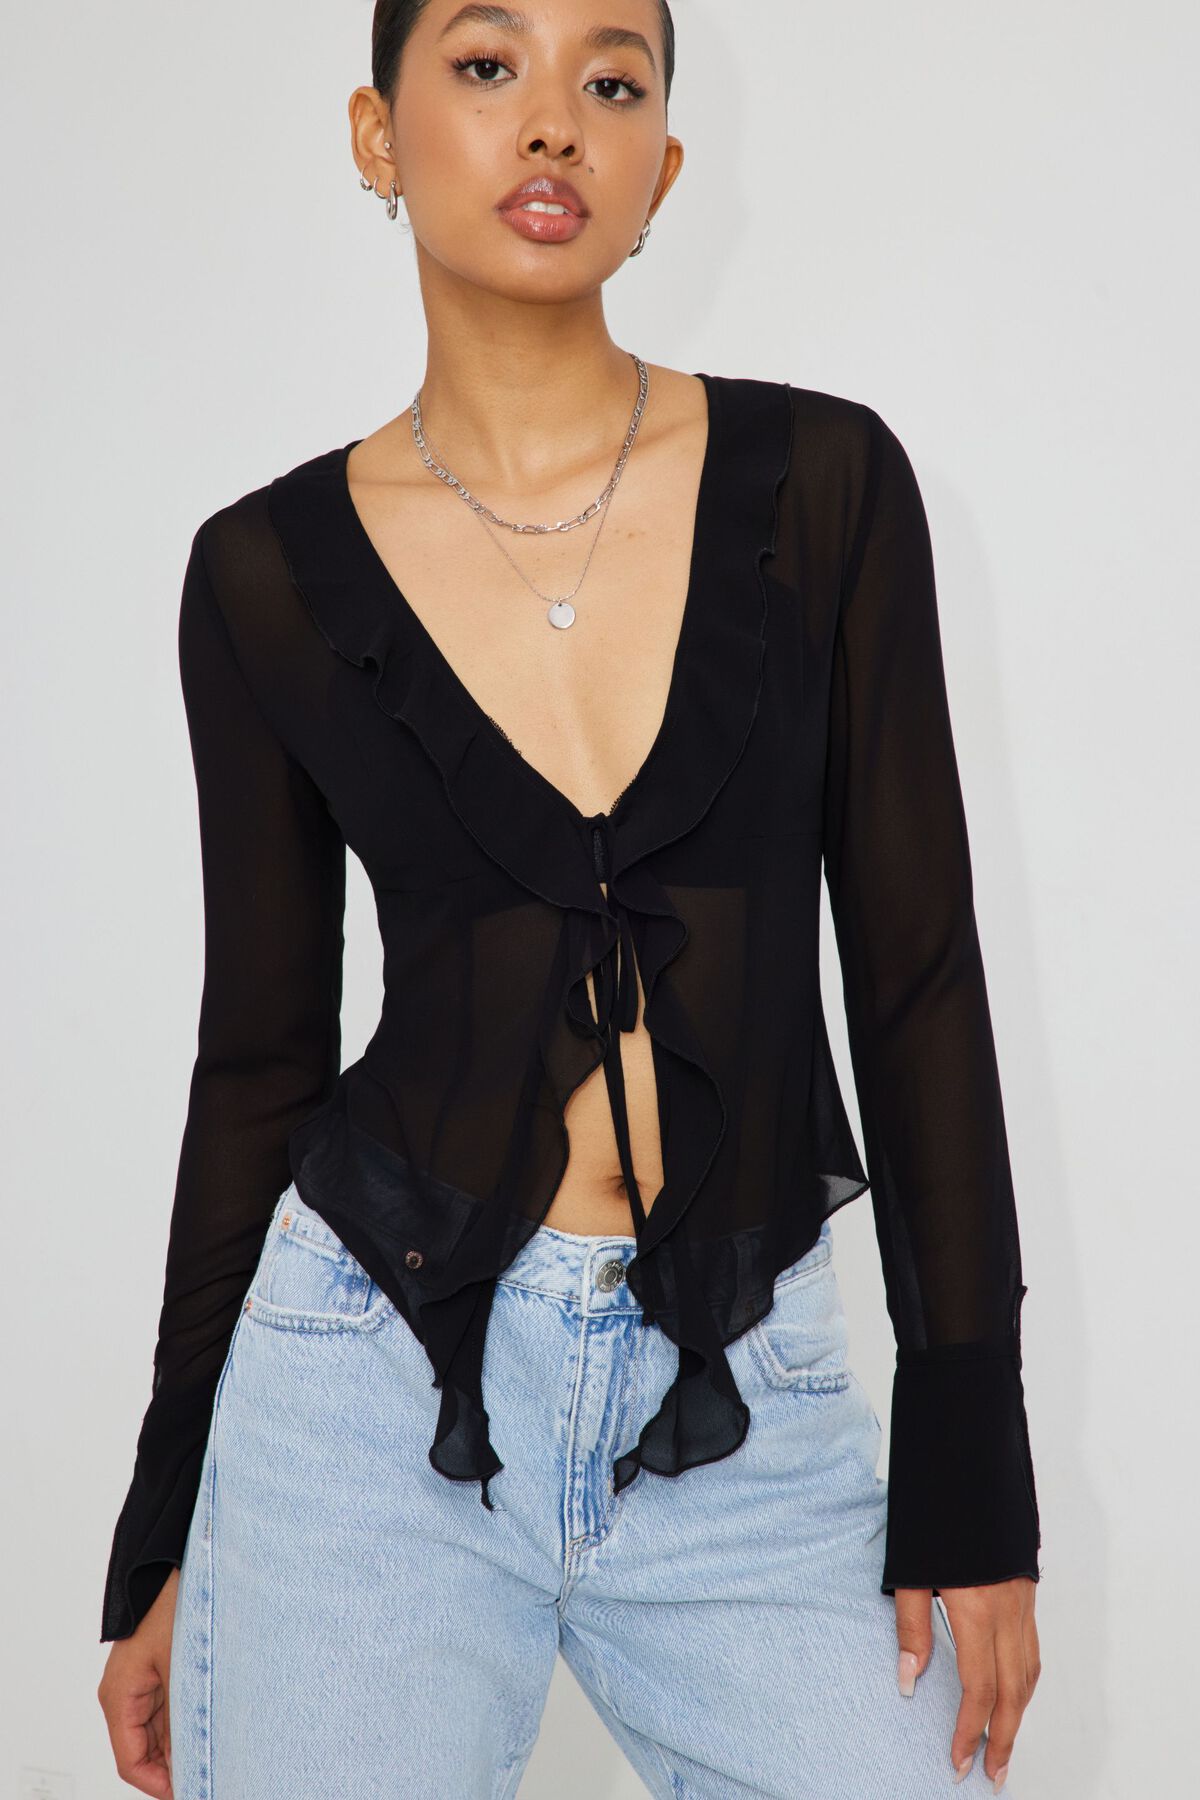 Unique Bargains Women's Long Sleeve Ruffle Mesh Top with Spaghetti Strap  Camisole L Black 